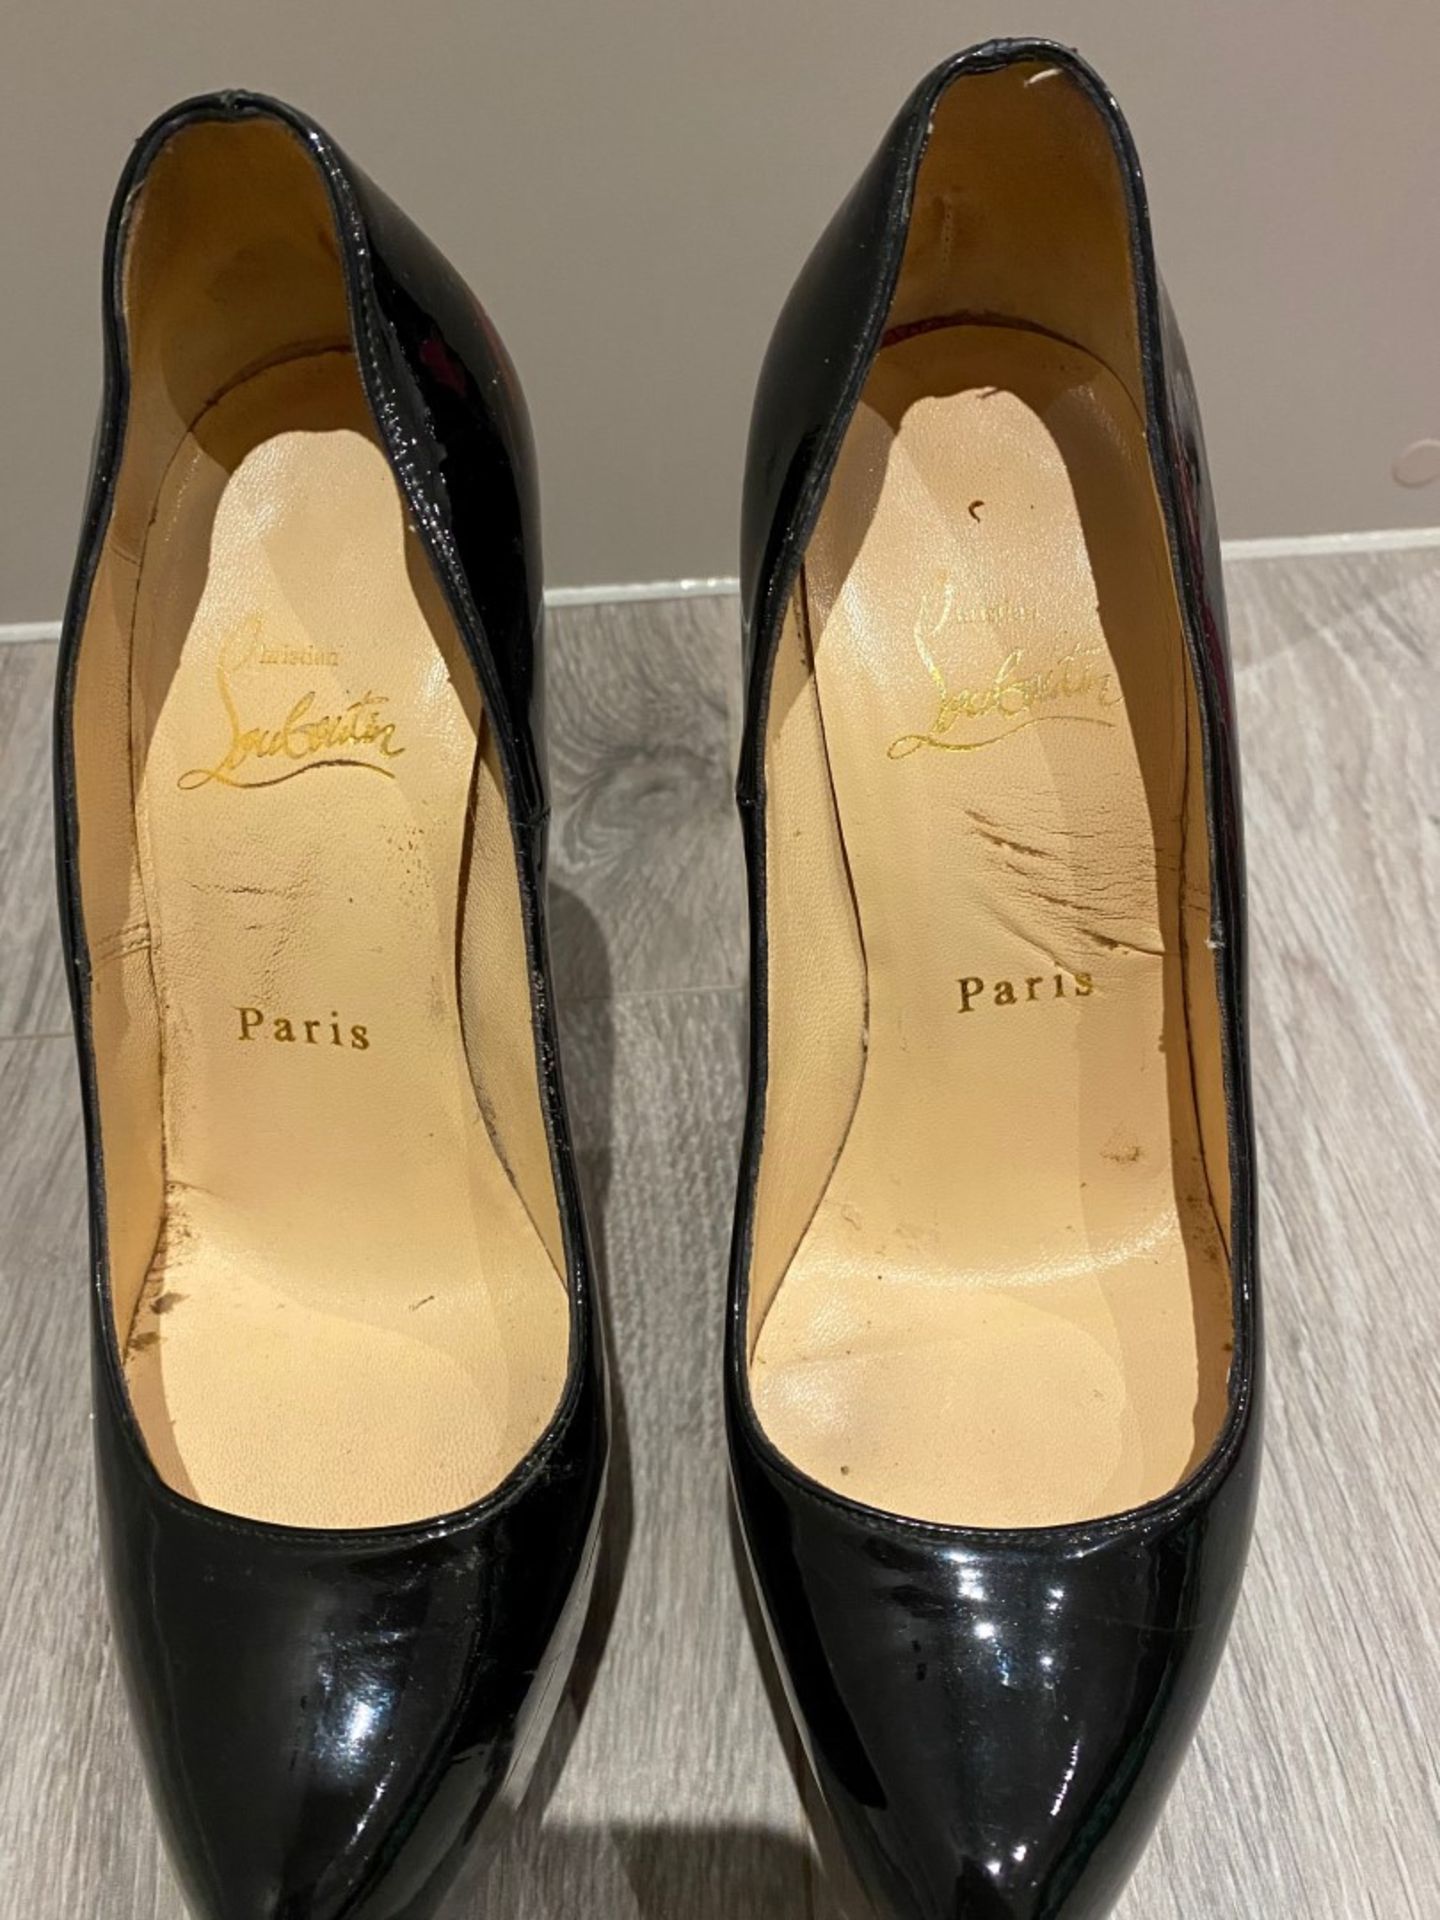 1 x Pair Of Genuine Christain Louboutin High Heel Shoes In Black - Size: 36.5 - Preowned in Worn Con - Image 2 of 5